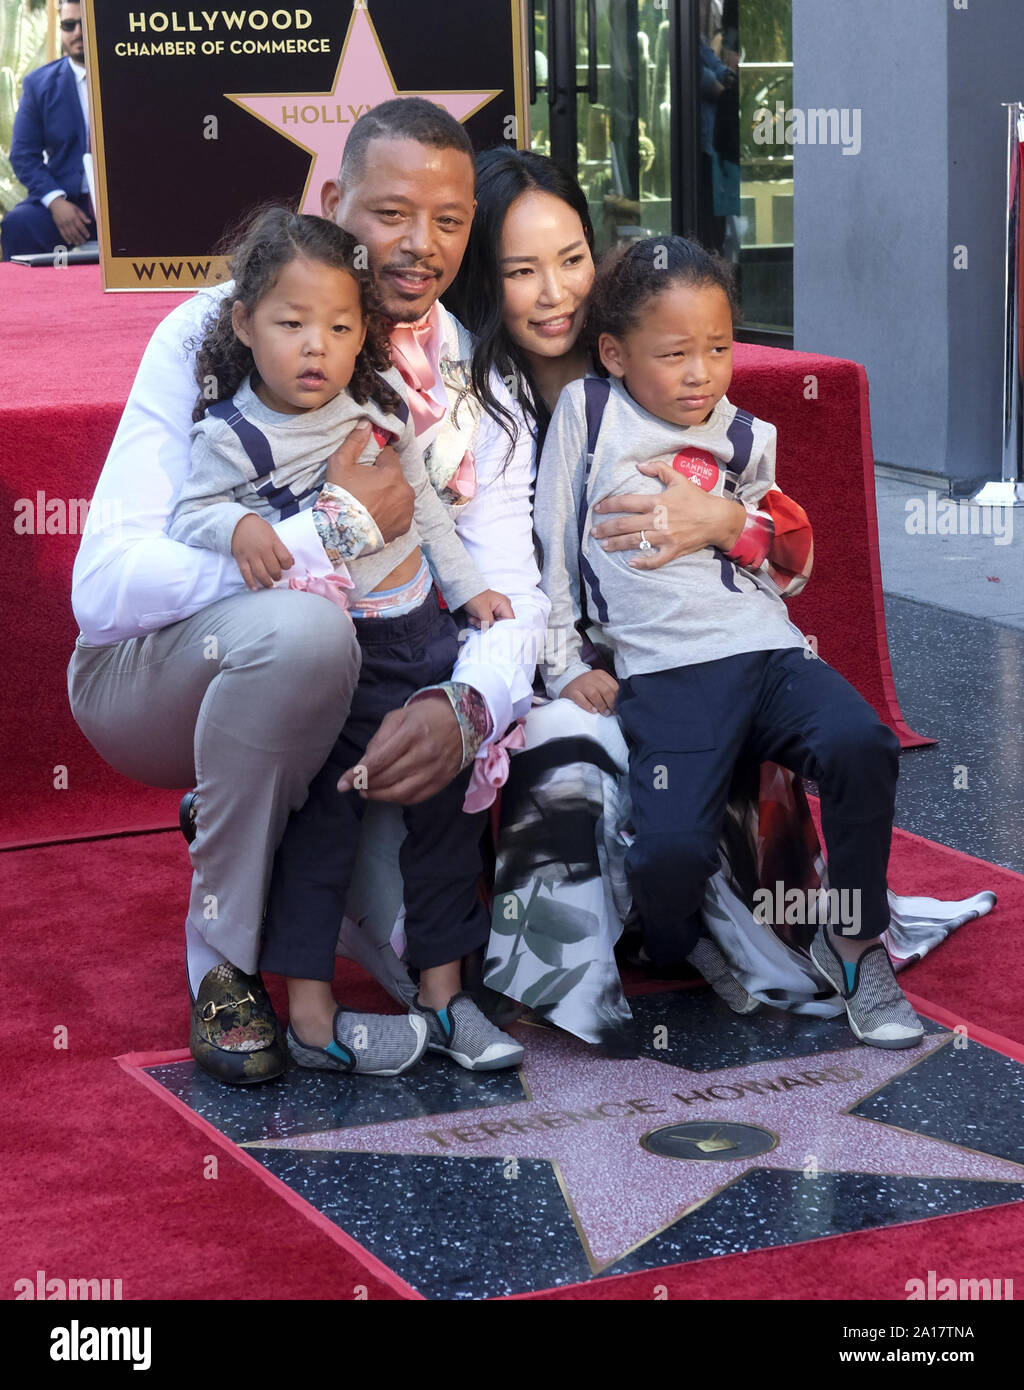 September 24, 2019, Los Angeles, California, U.S: Actor Terrence Howard and his wife Miranda Pak with their kids attend his star ceremony on the Hollywood Walk of Fame in the Category of Television, on Tuesday, Sept. 24, 2019, in Los Angeles (Credit Image: © Ringo Chiu/ZUMA Wire) Stock Photo